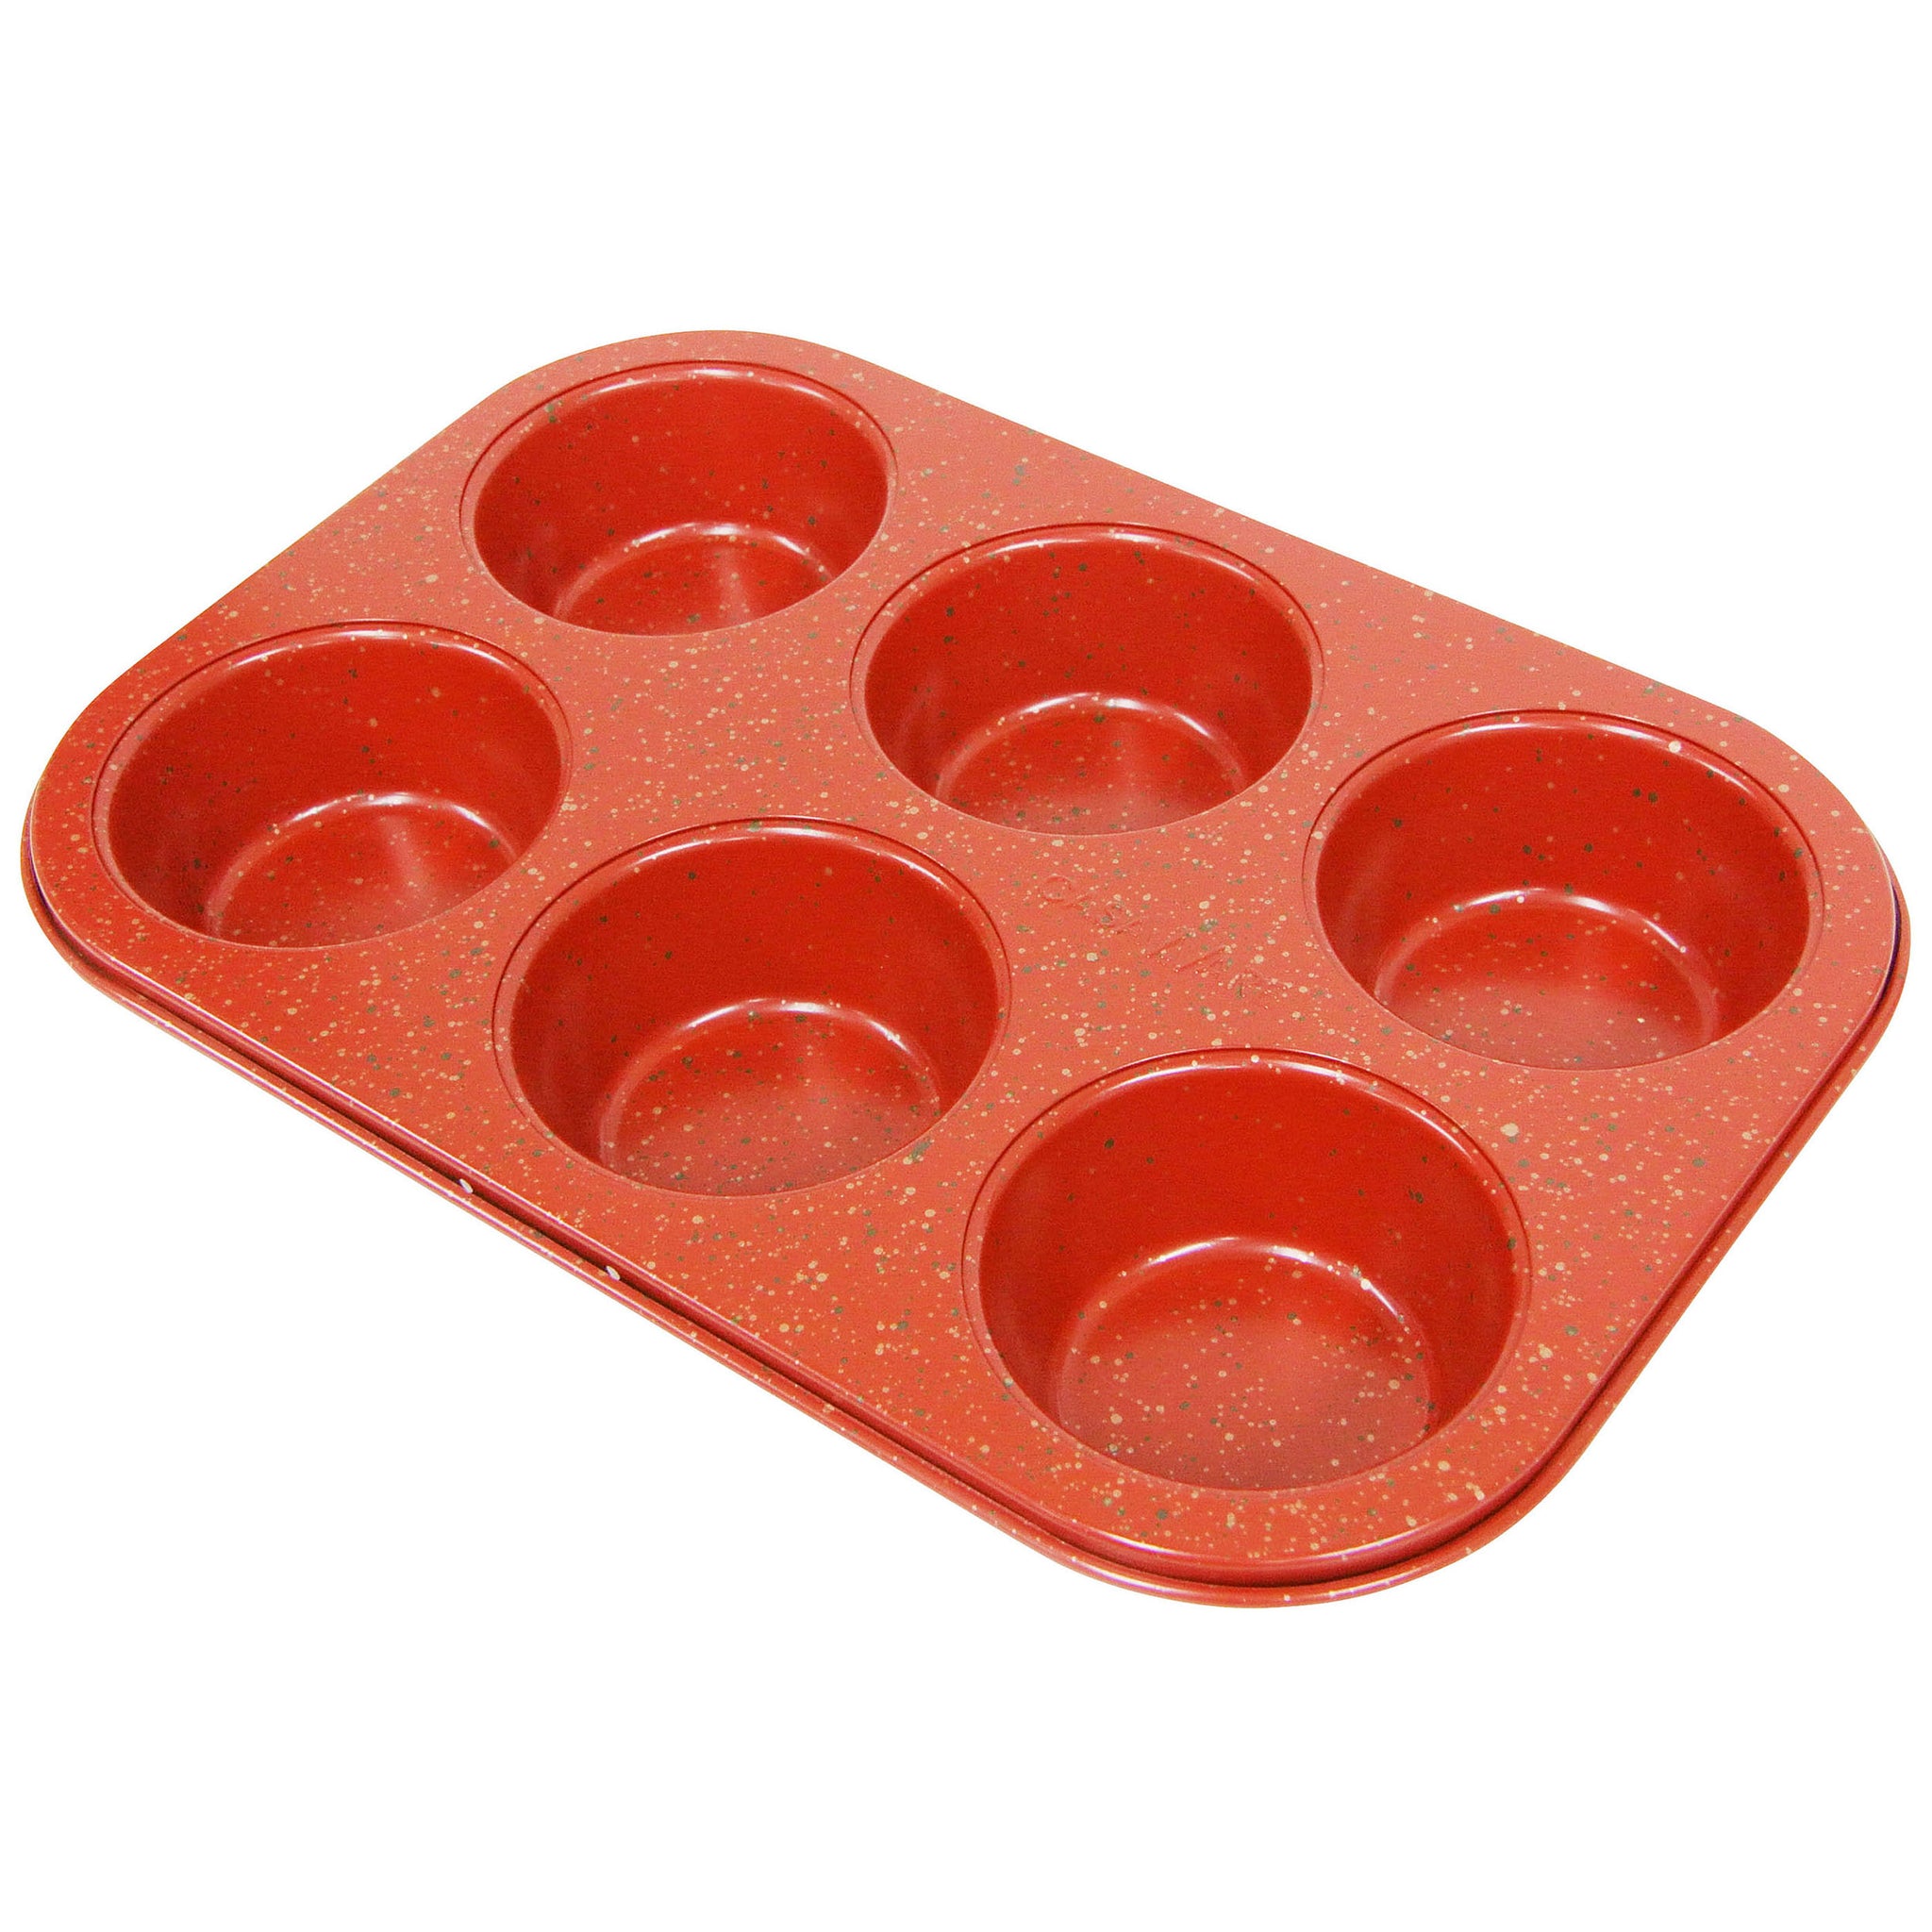 casaWare Toaster Oven 6 Cup Muffin Pan NonStick Ceramic Coated (Red Granite)